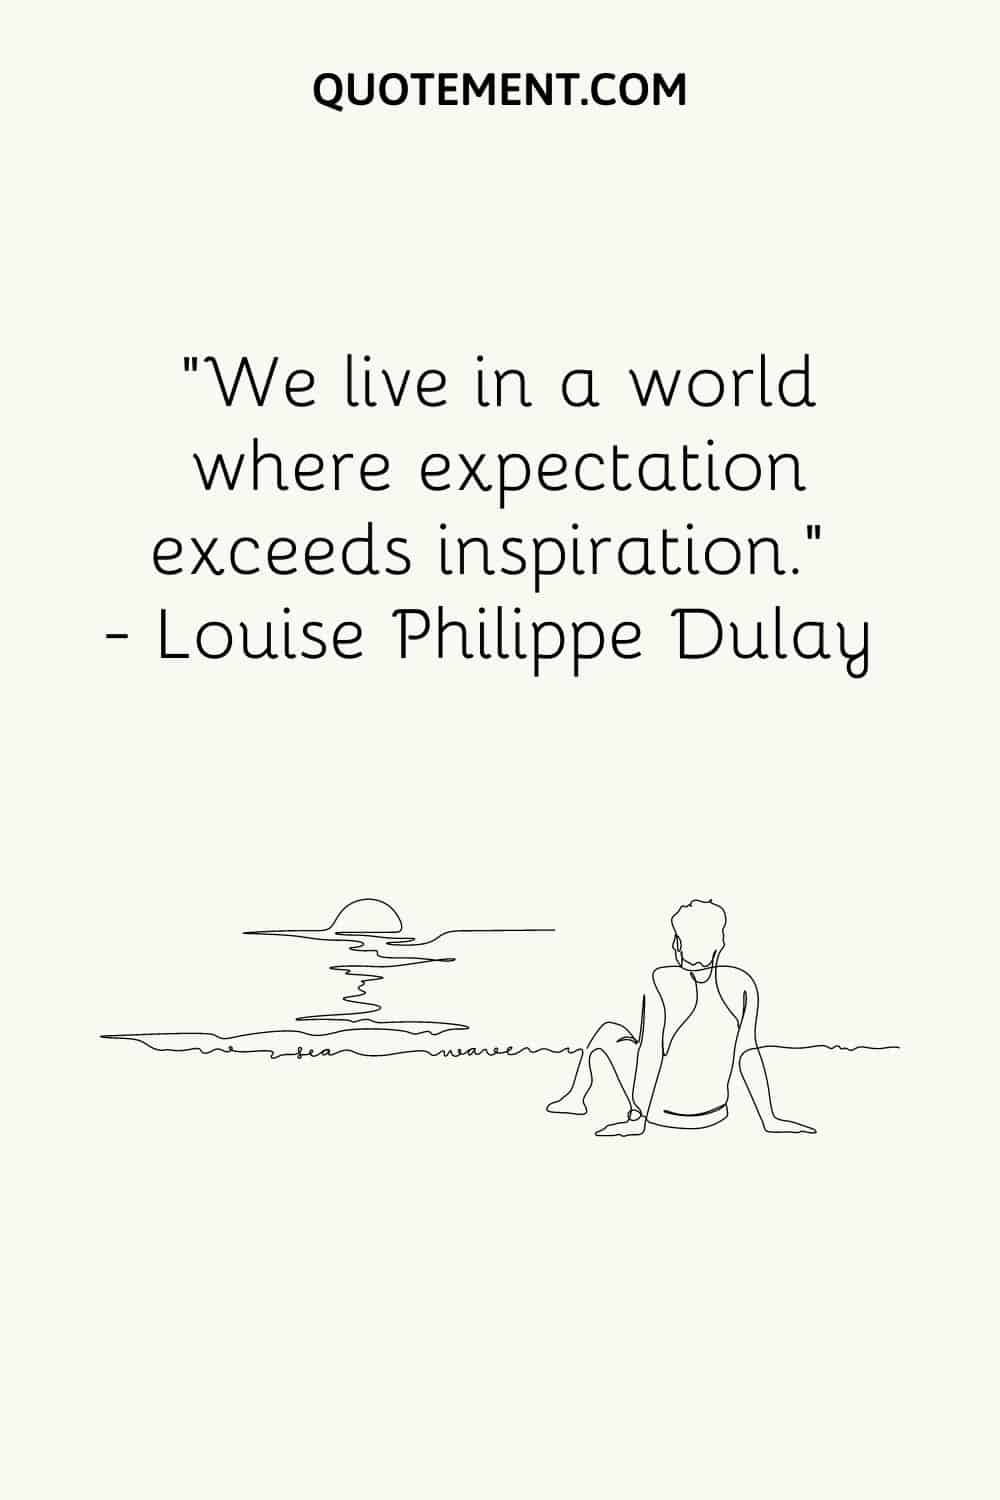 We live in a world where expectation exceeds inspiration